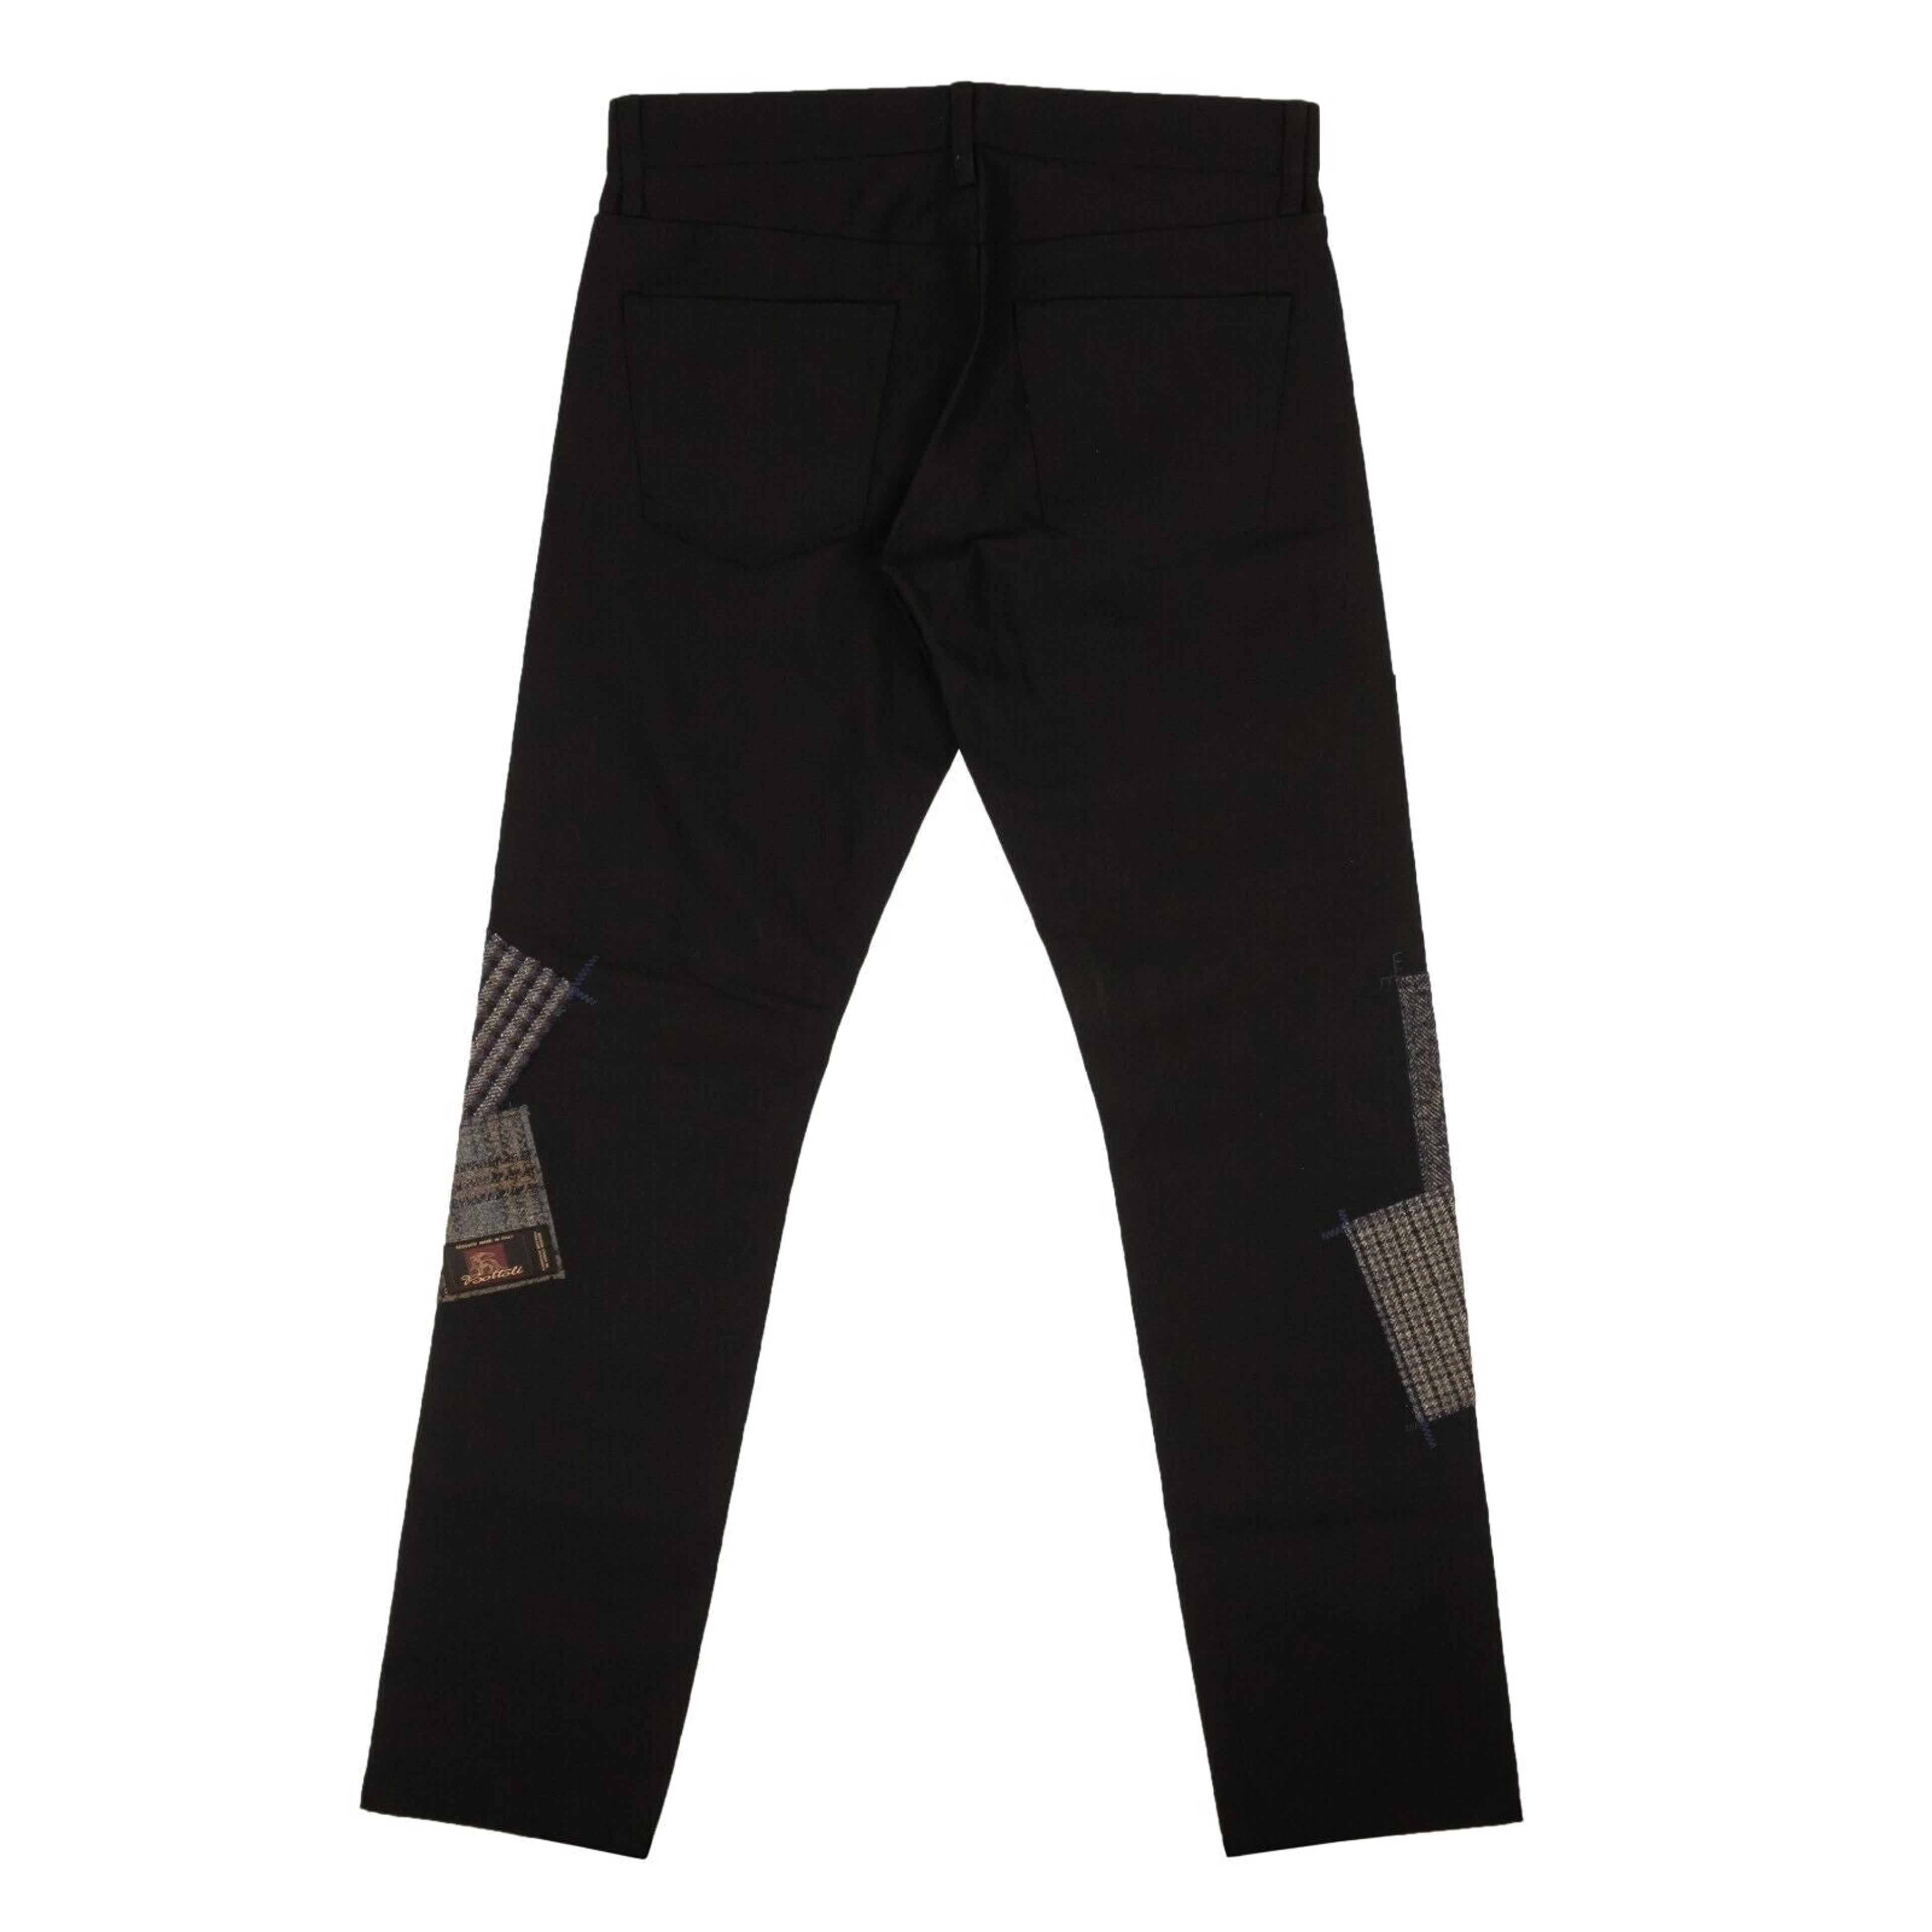 Alternate View 2 of Black Polyester Patchwork Throughout Pants